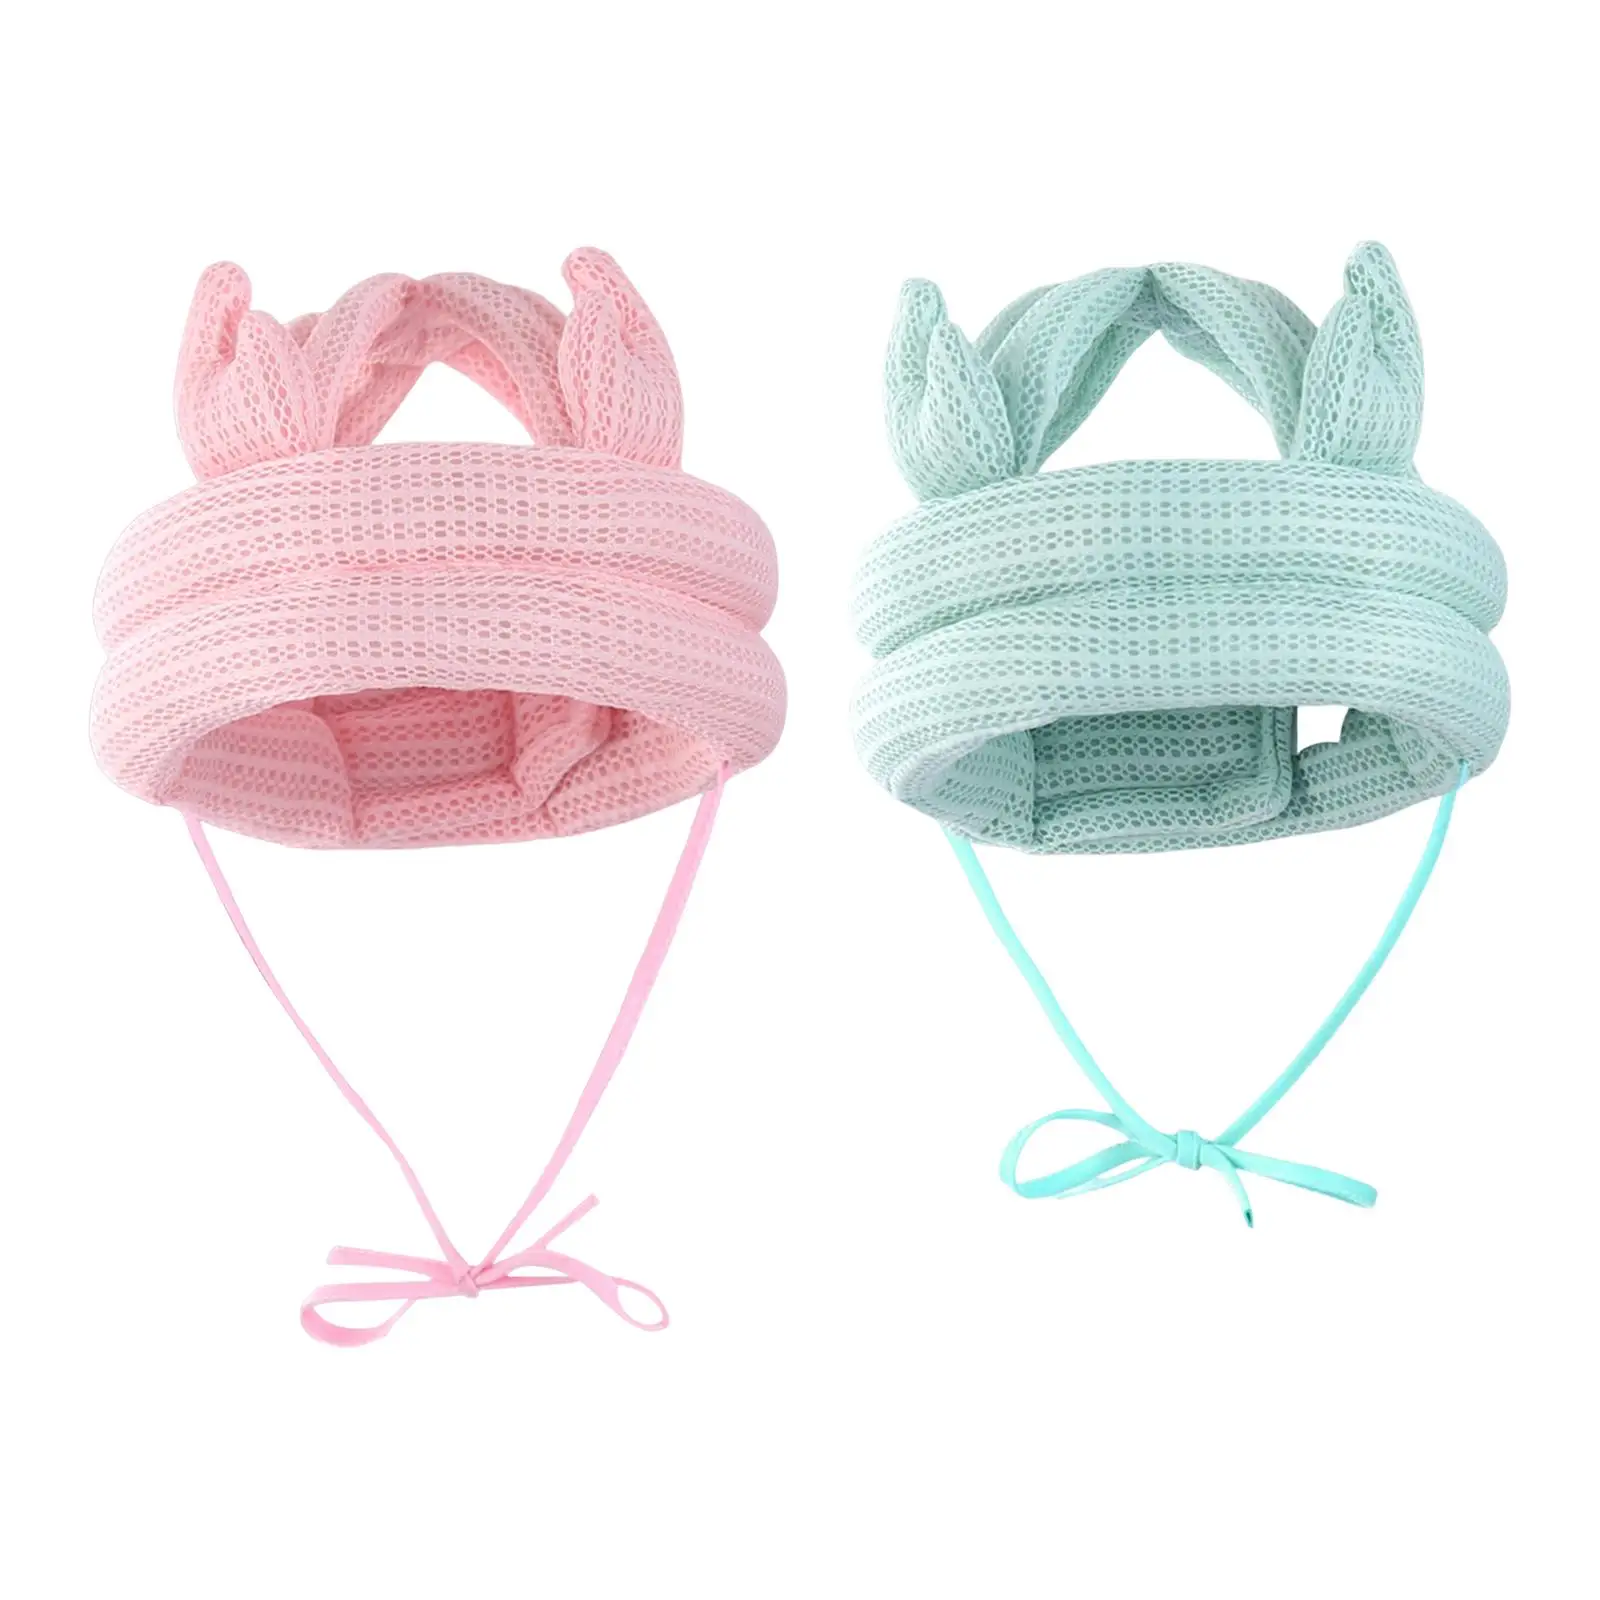 Head Protector Comfortable Adjustable Baby Protective Harnesses Cap Baby Hat for Children 0-5 Years Old Infant Playing Running